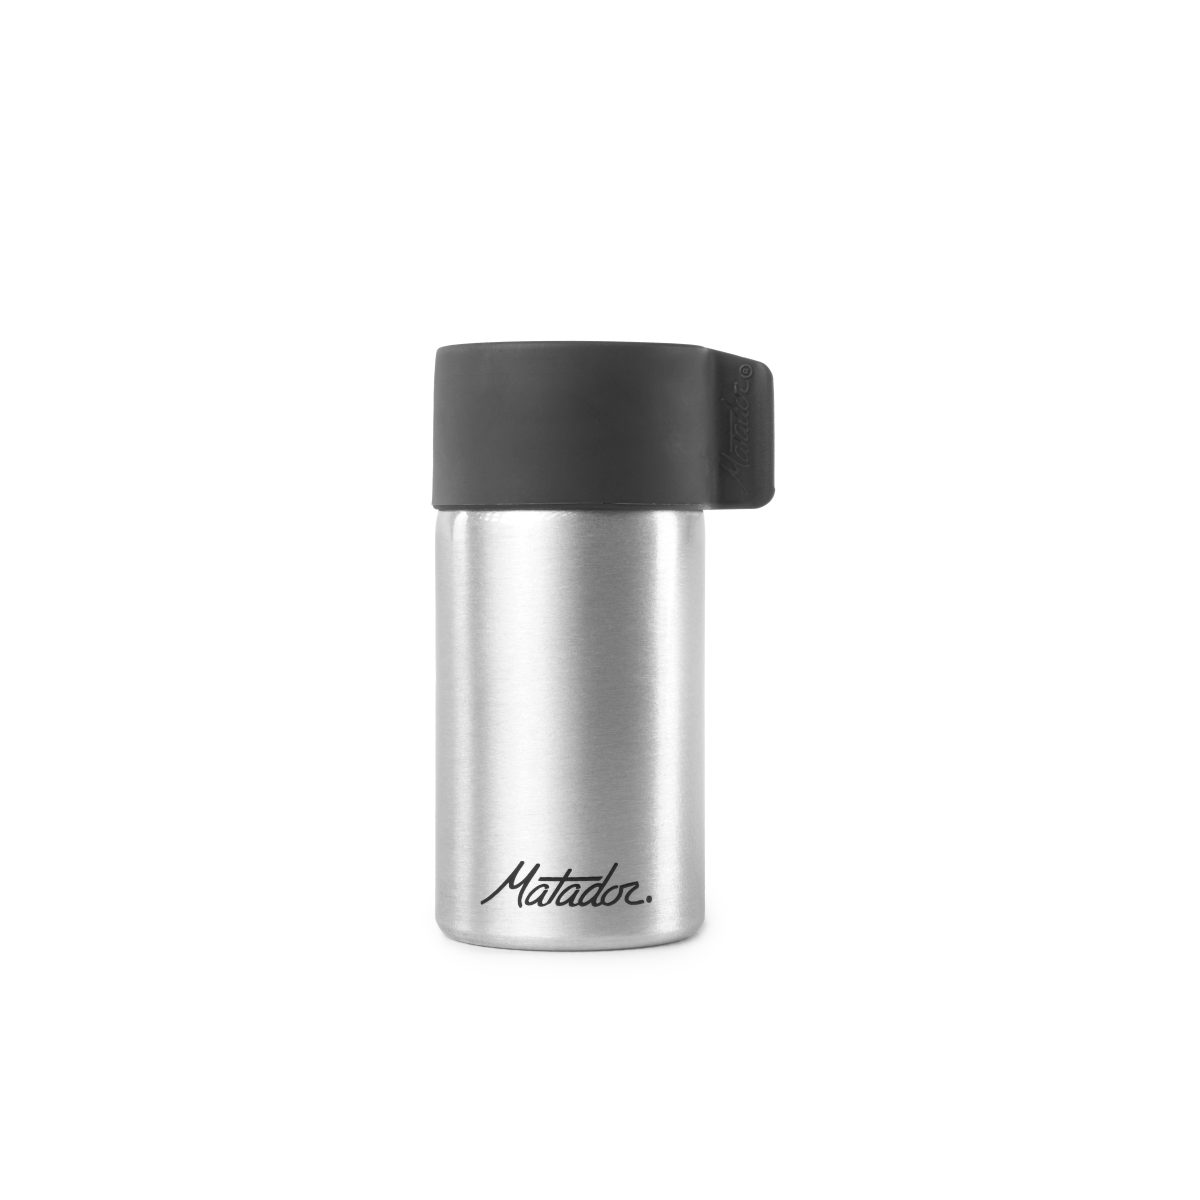 Waterproof Travel Canister – 40ml